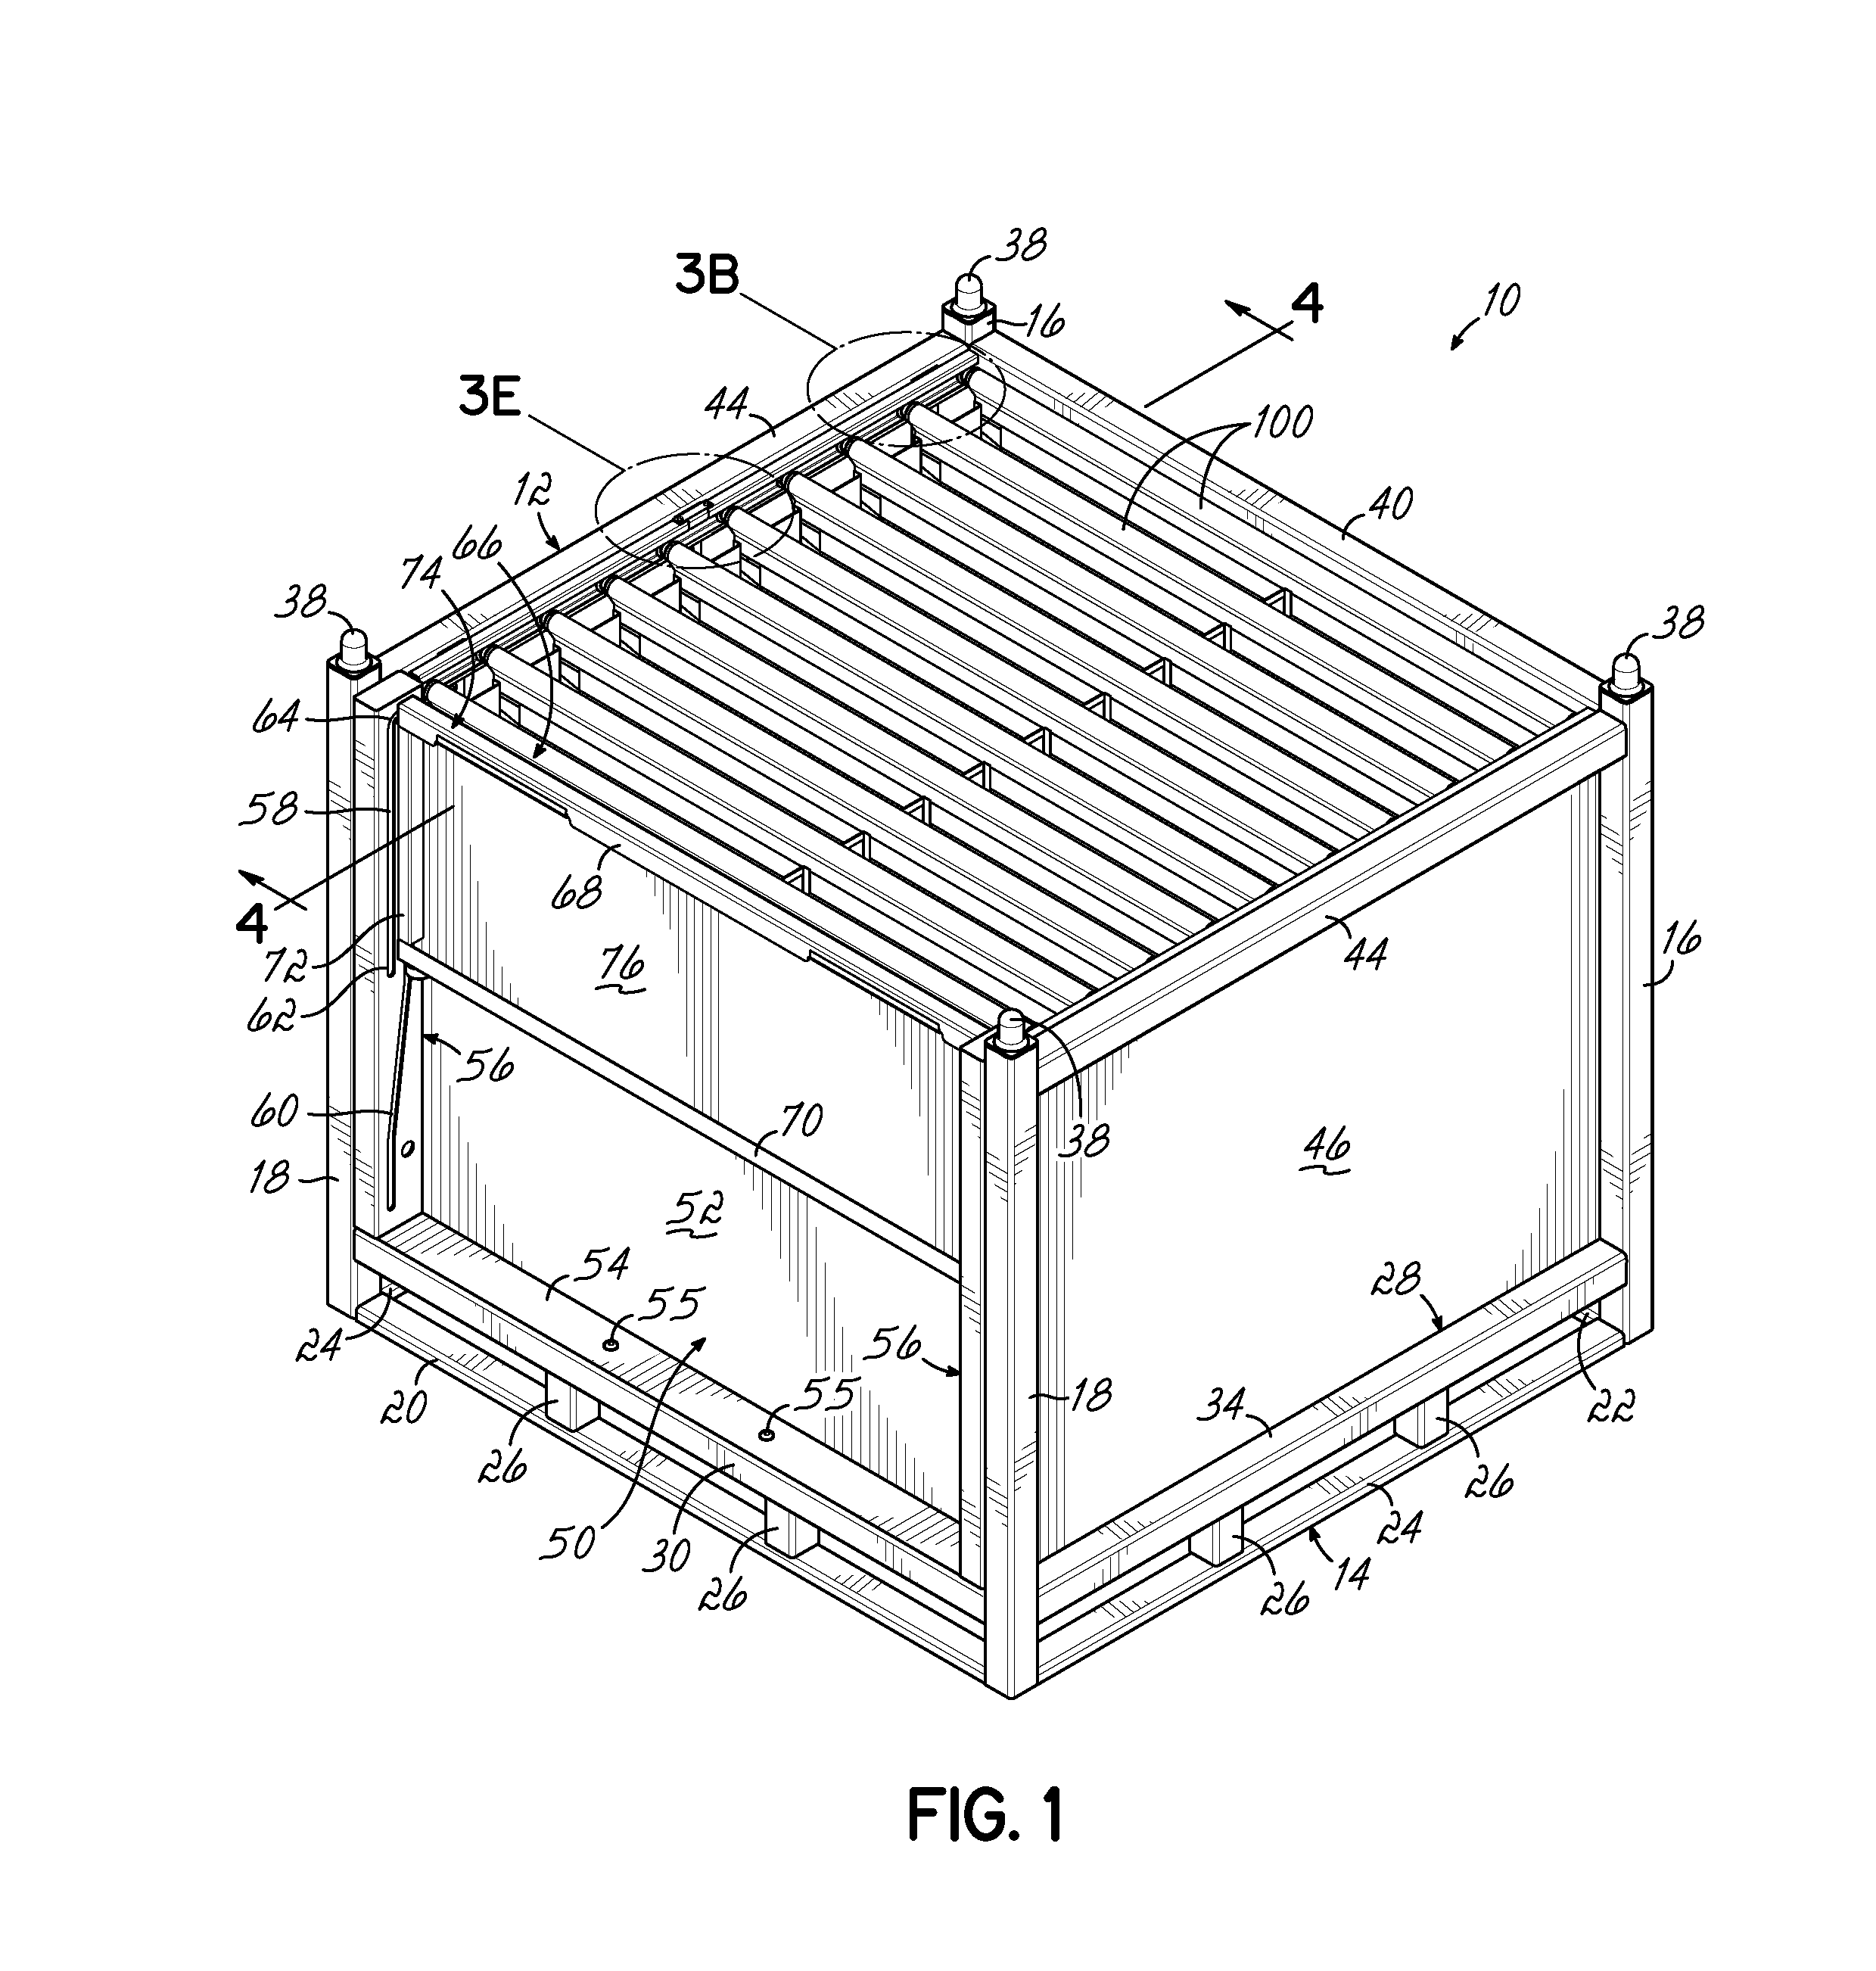 Container having door assembly and multiple layers of tracks